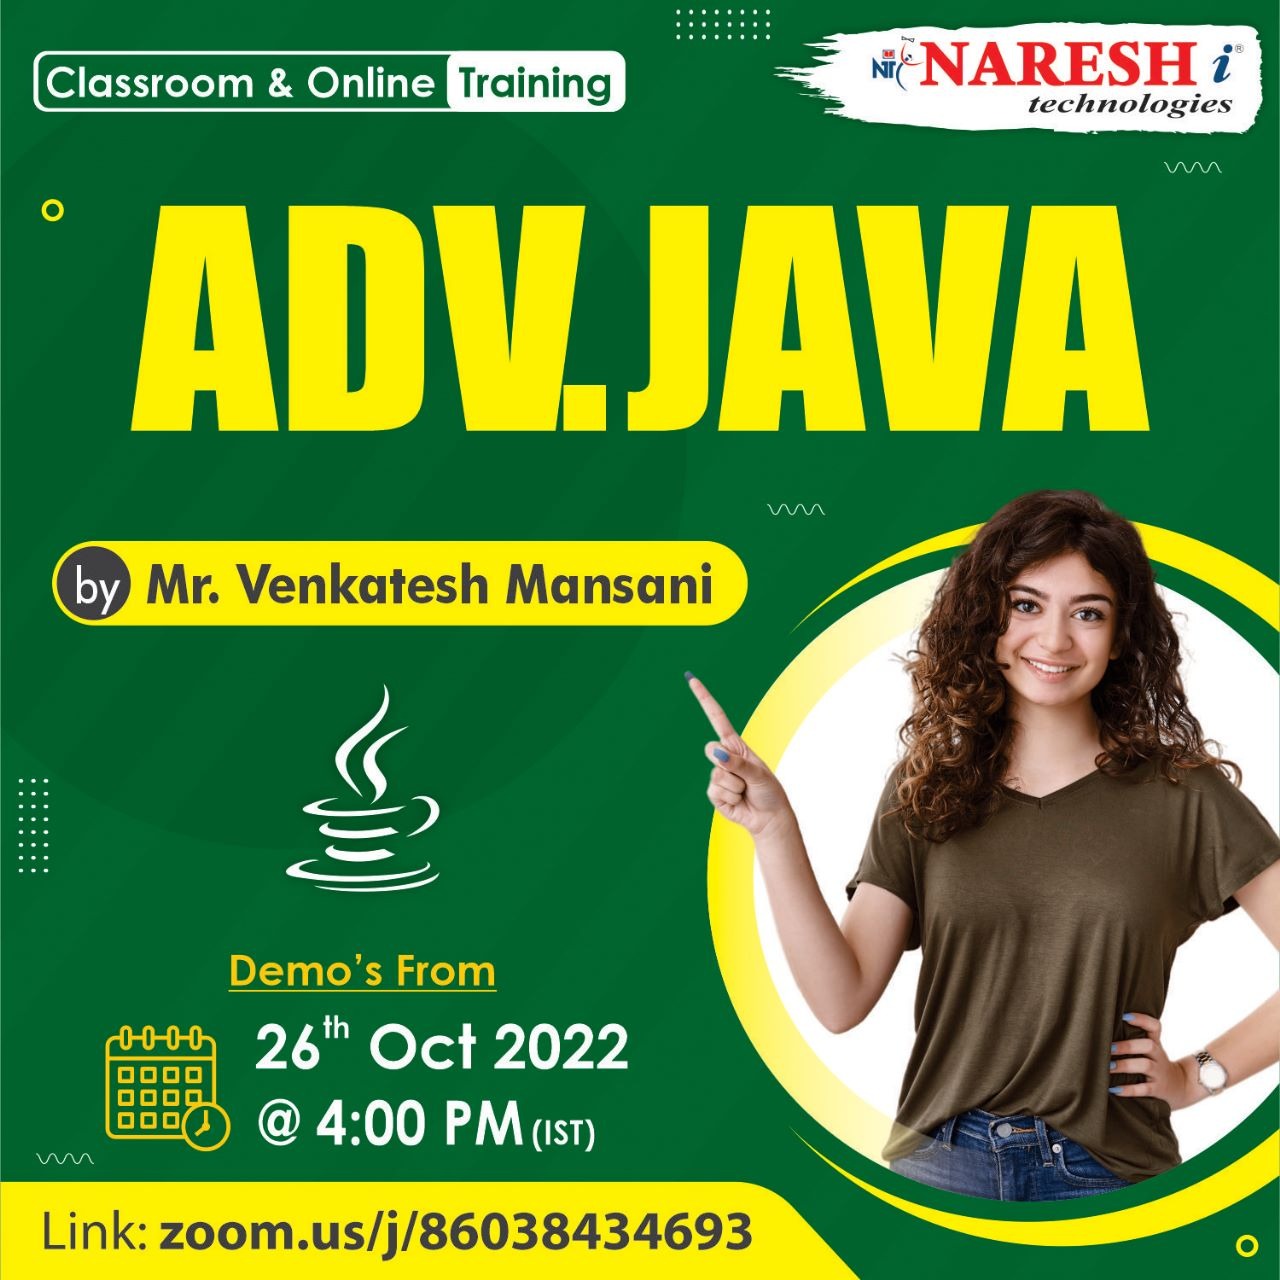 Attend Free Demo On Advanced Java Course in Nareshit, Online Event